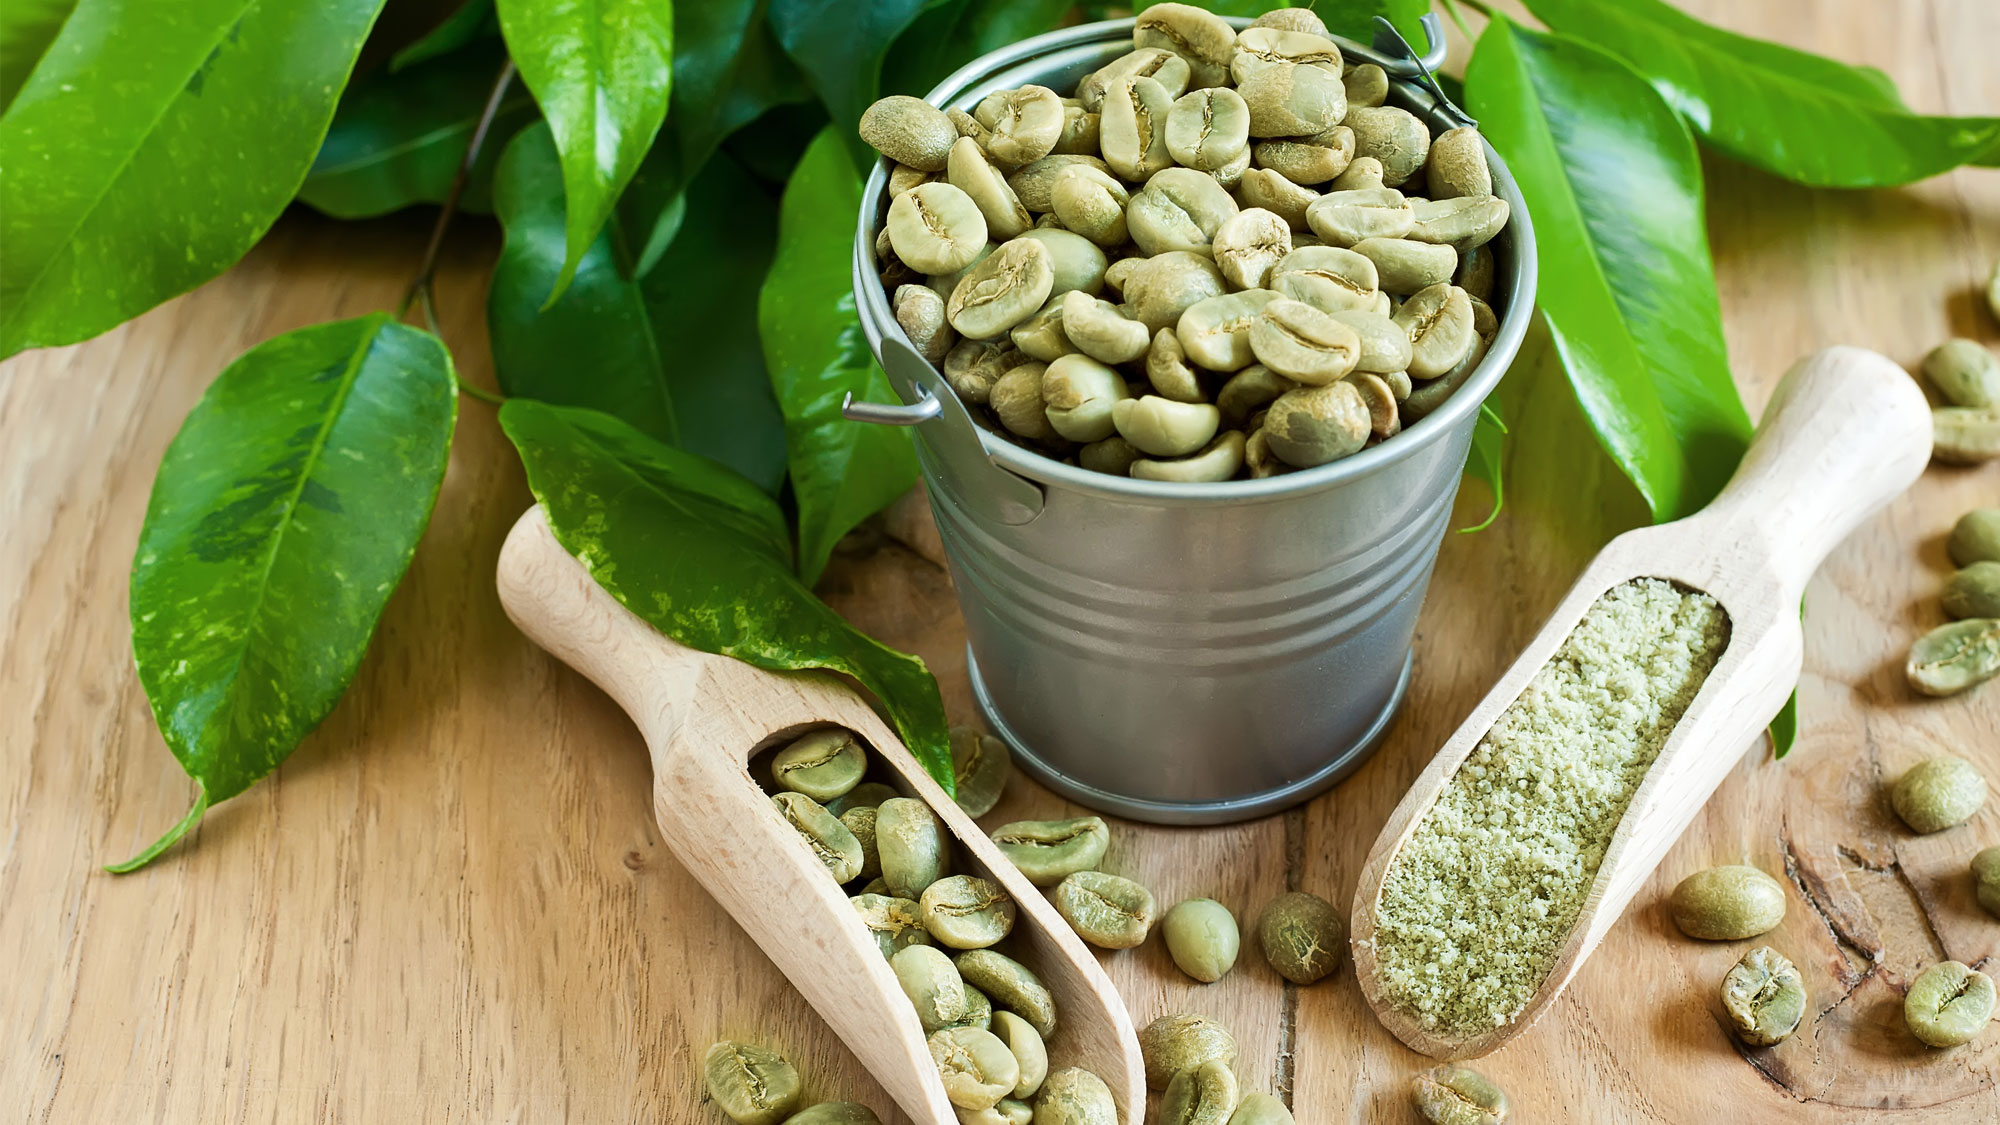 Why Everyone is Falling in Love with Green Coffee